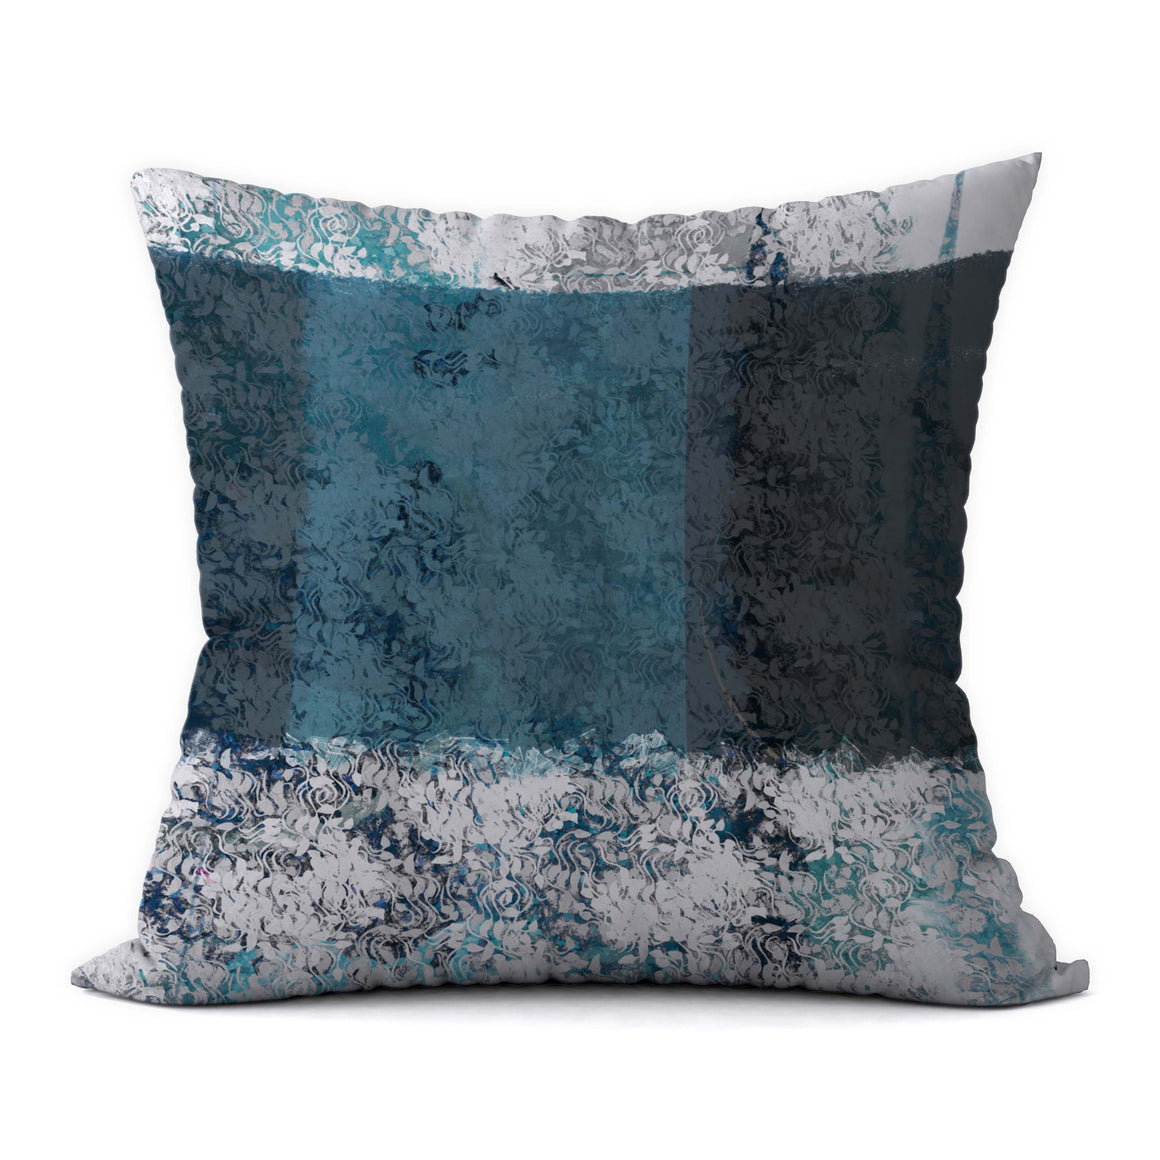 Sunny Day Blues 2 #732 Decorative Throw Pillow